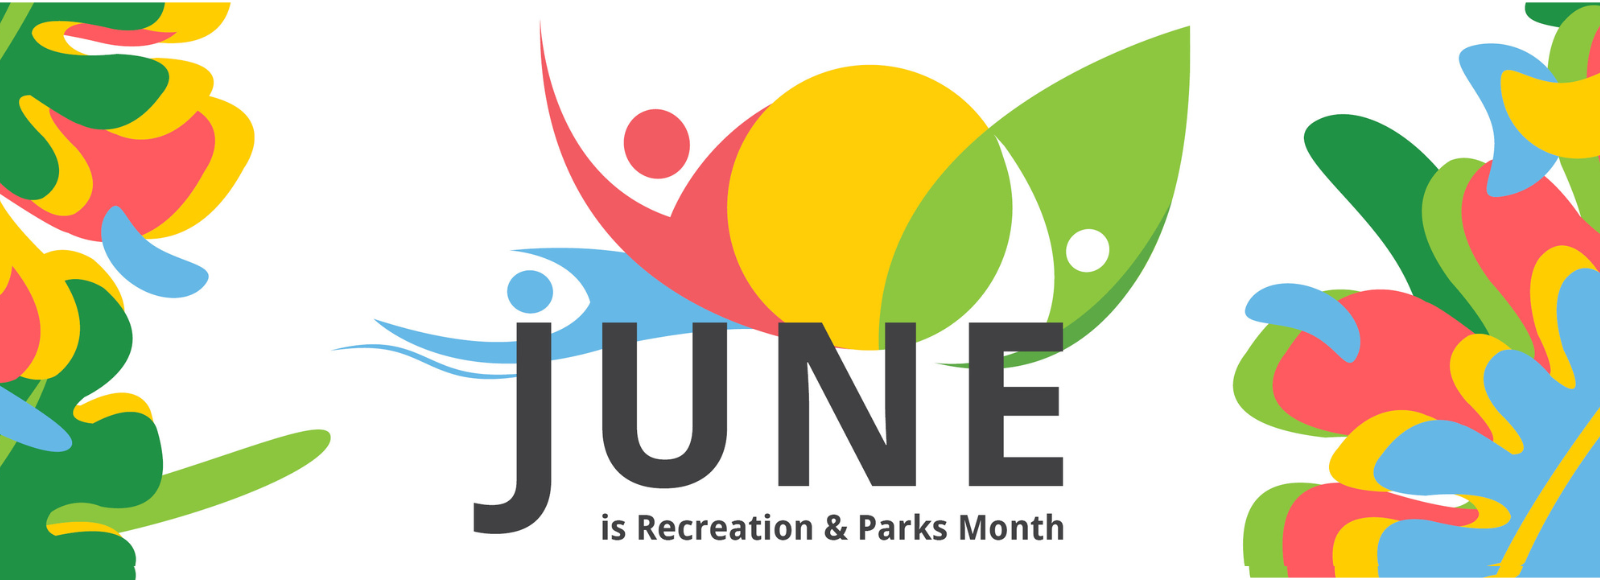 June is Recreation and Parks month